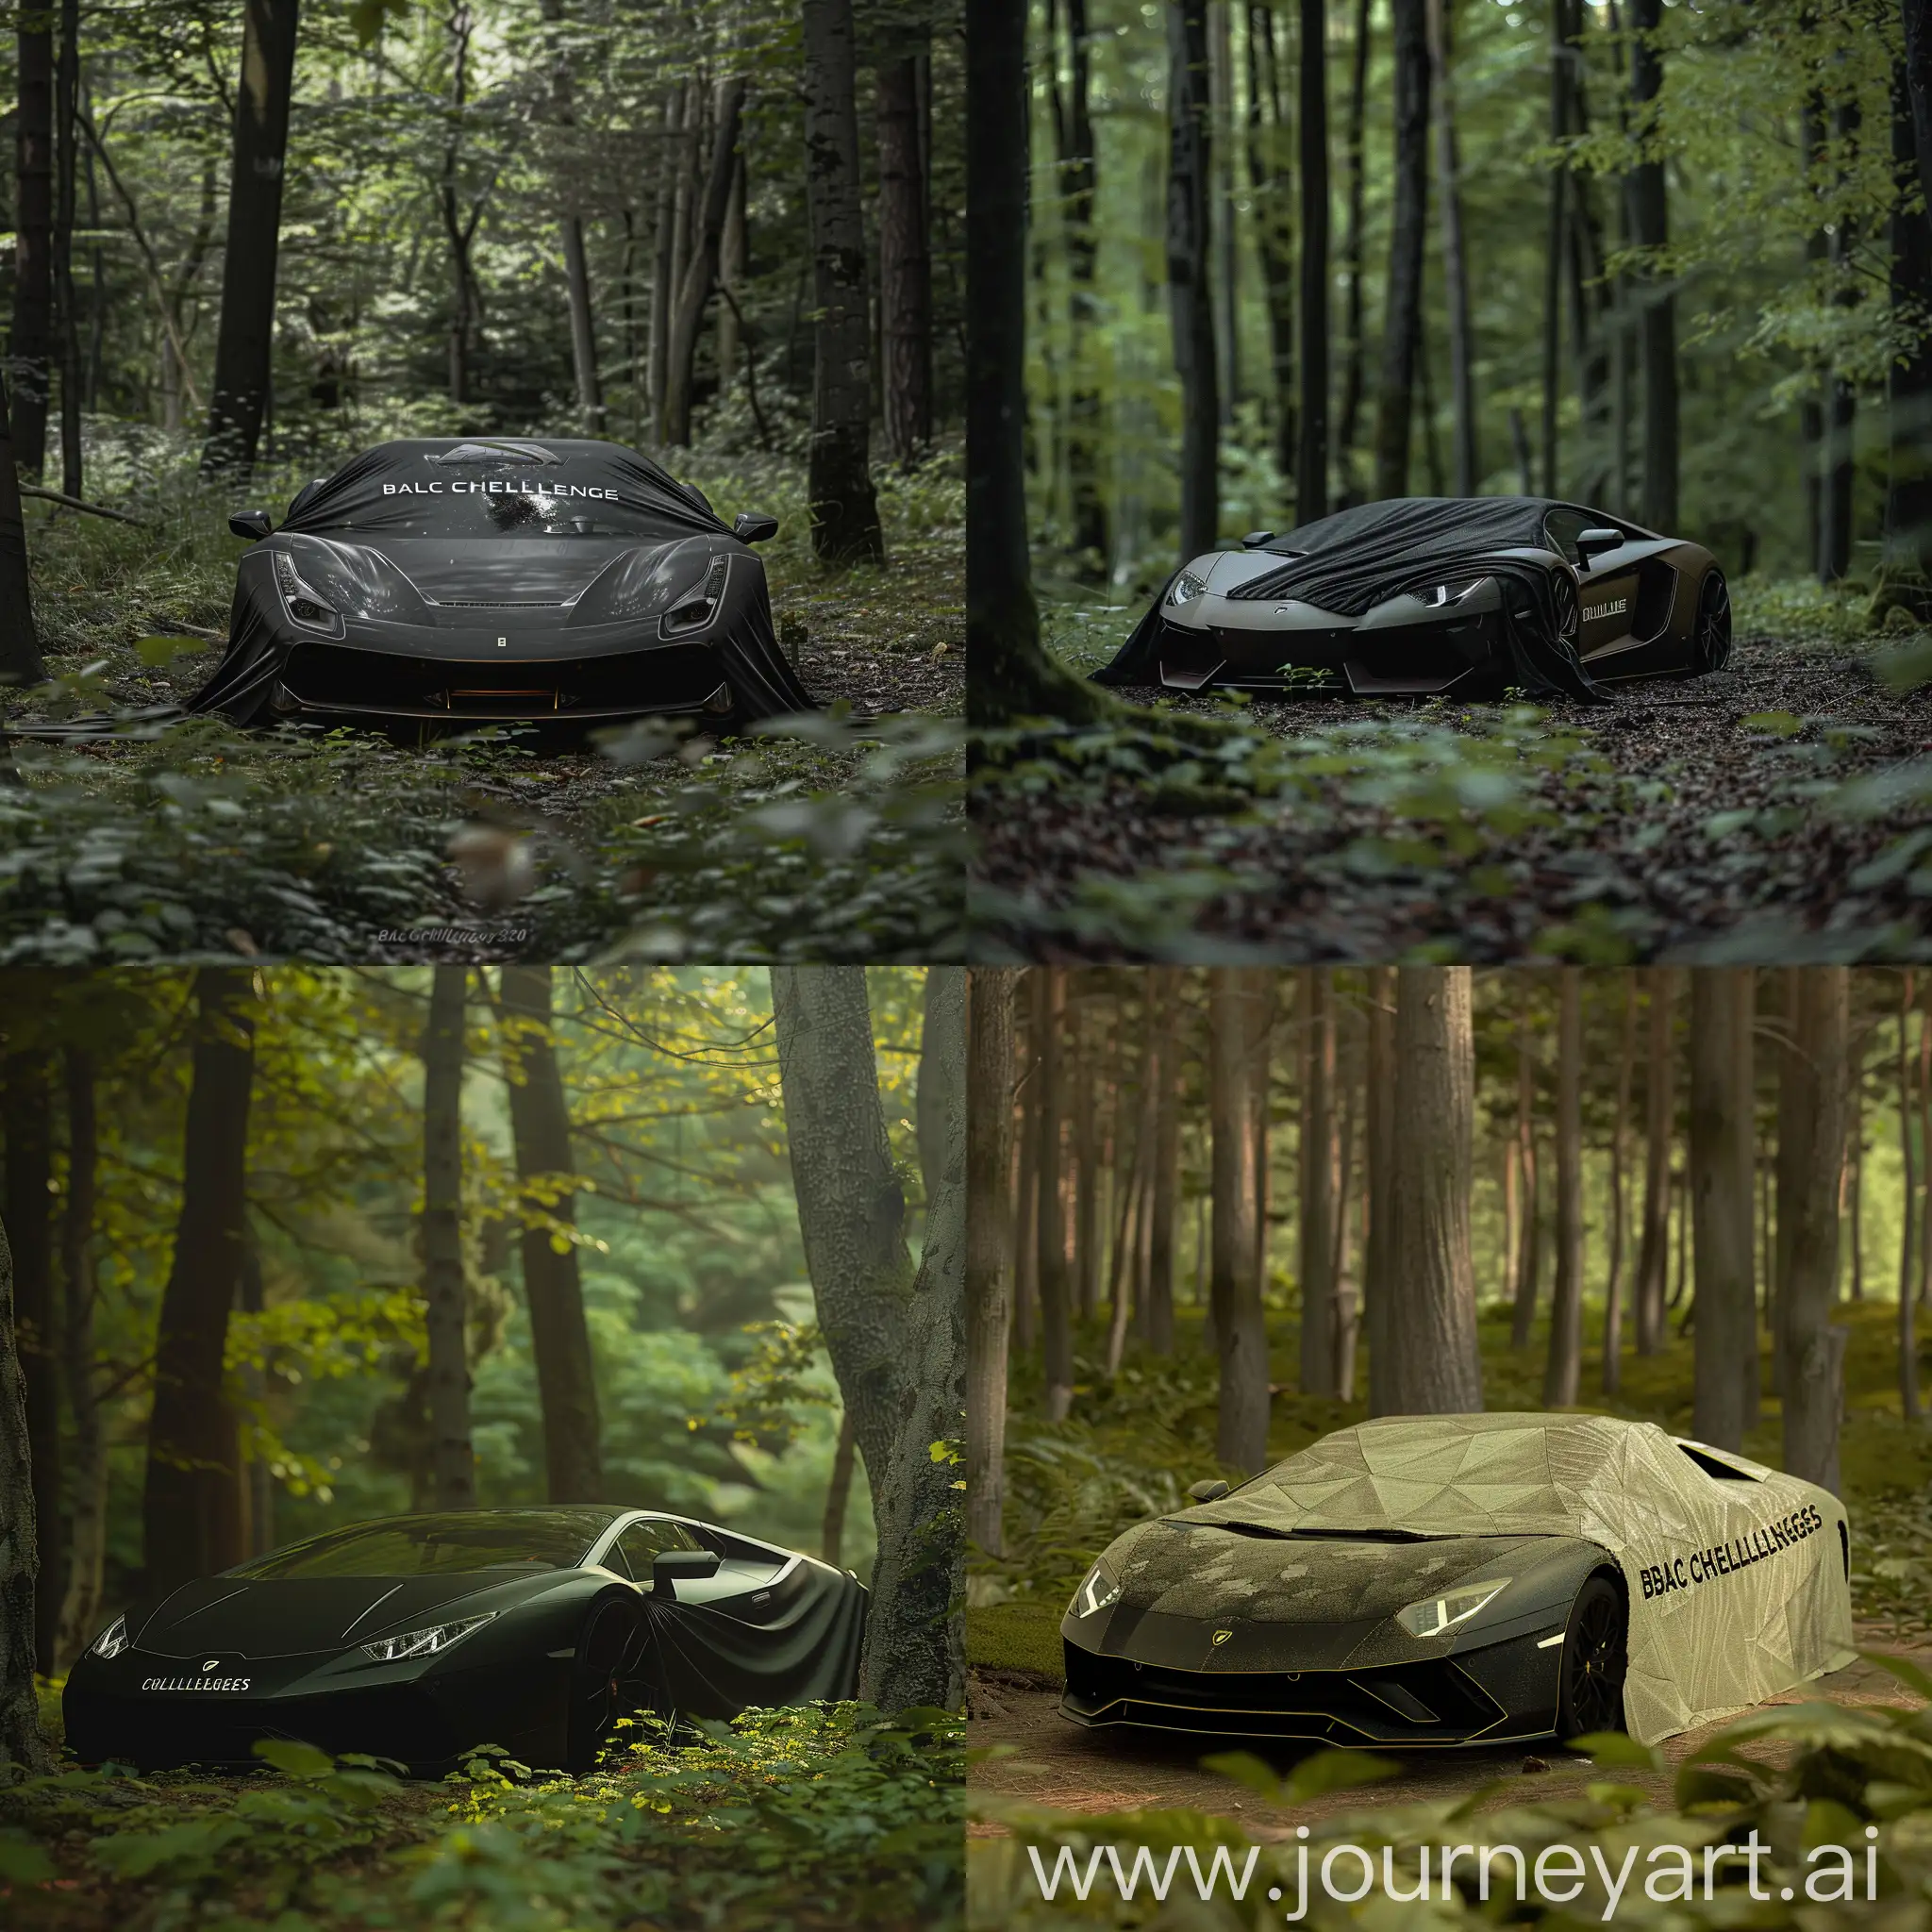 Black-Challenges-Sports-Car-Covered-in-Forest